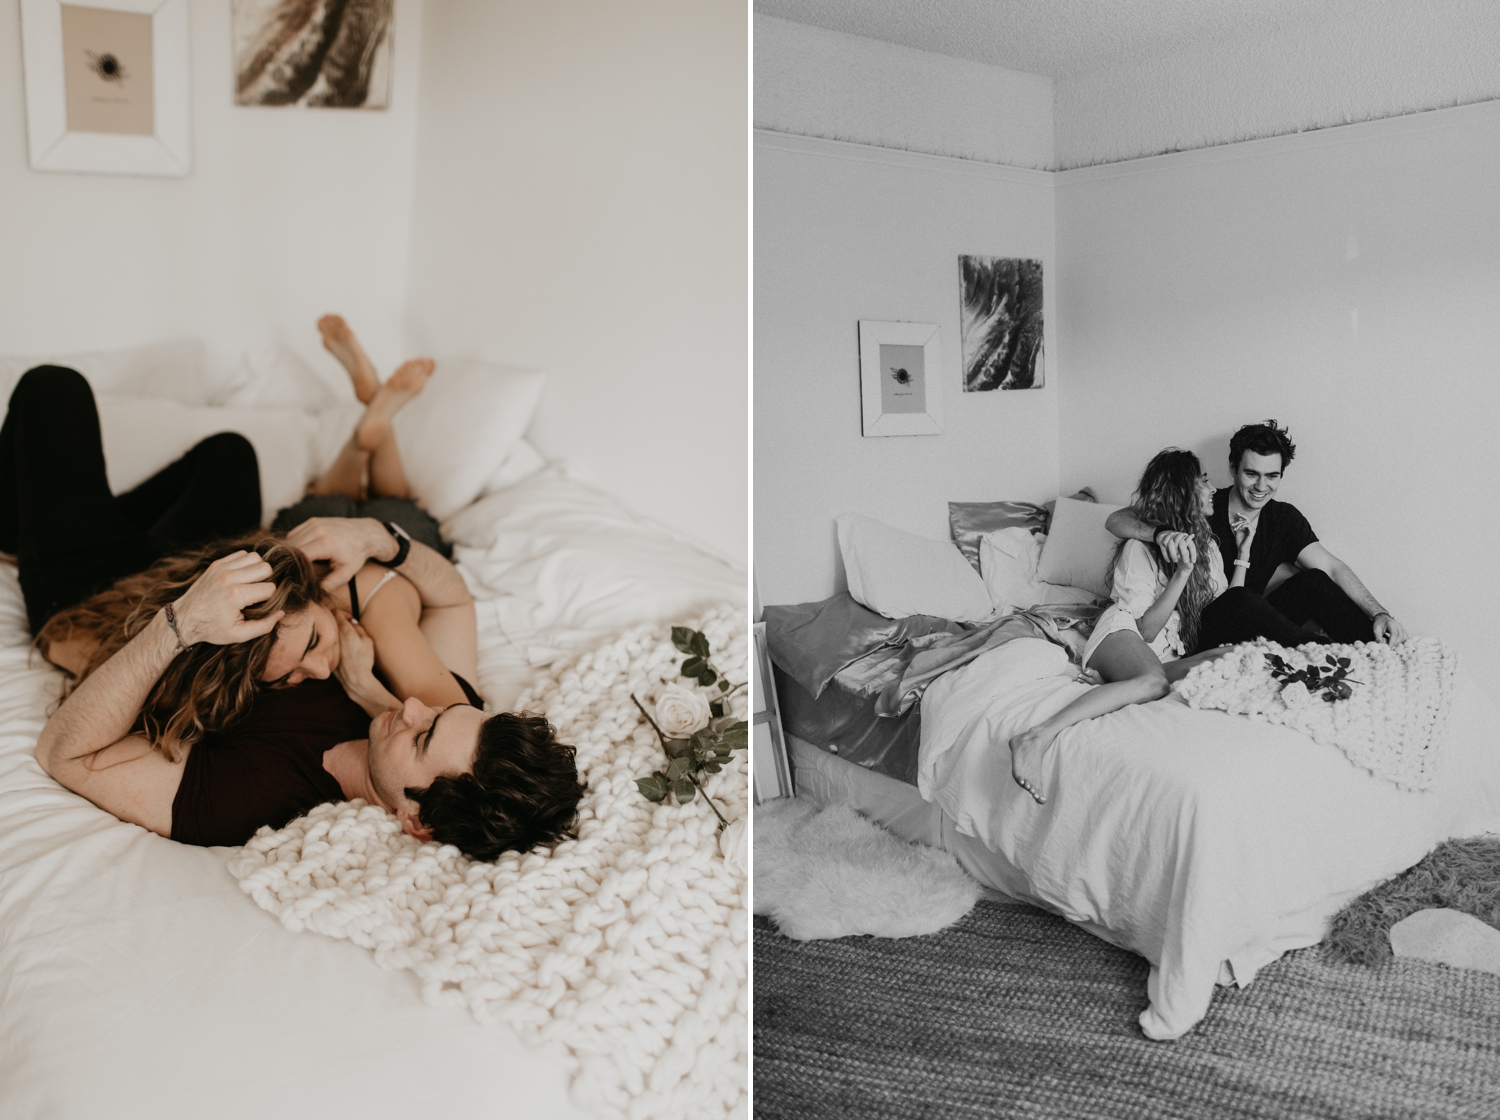 A In home engagement session in los angeles by Kadi Tobin, a los angeles wedding photographer